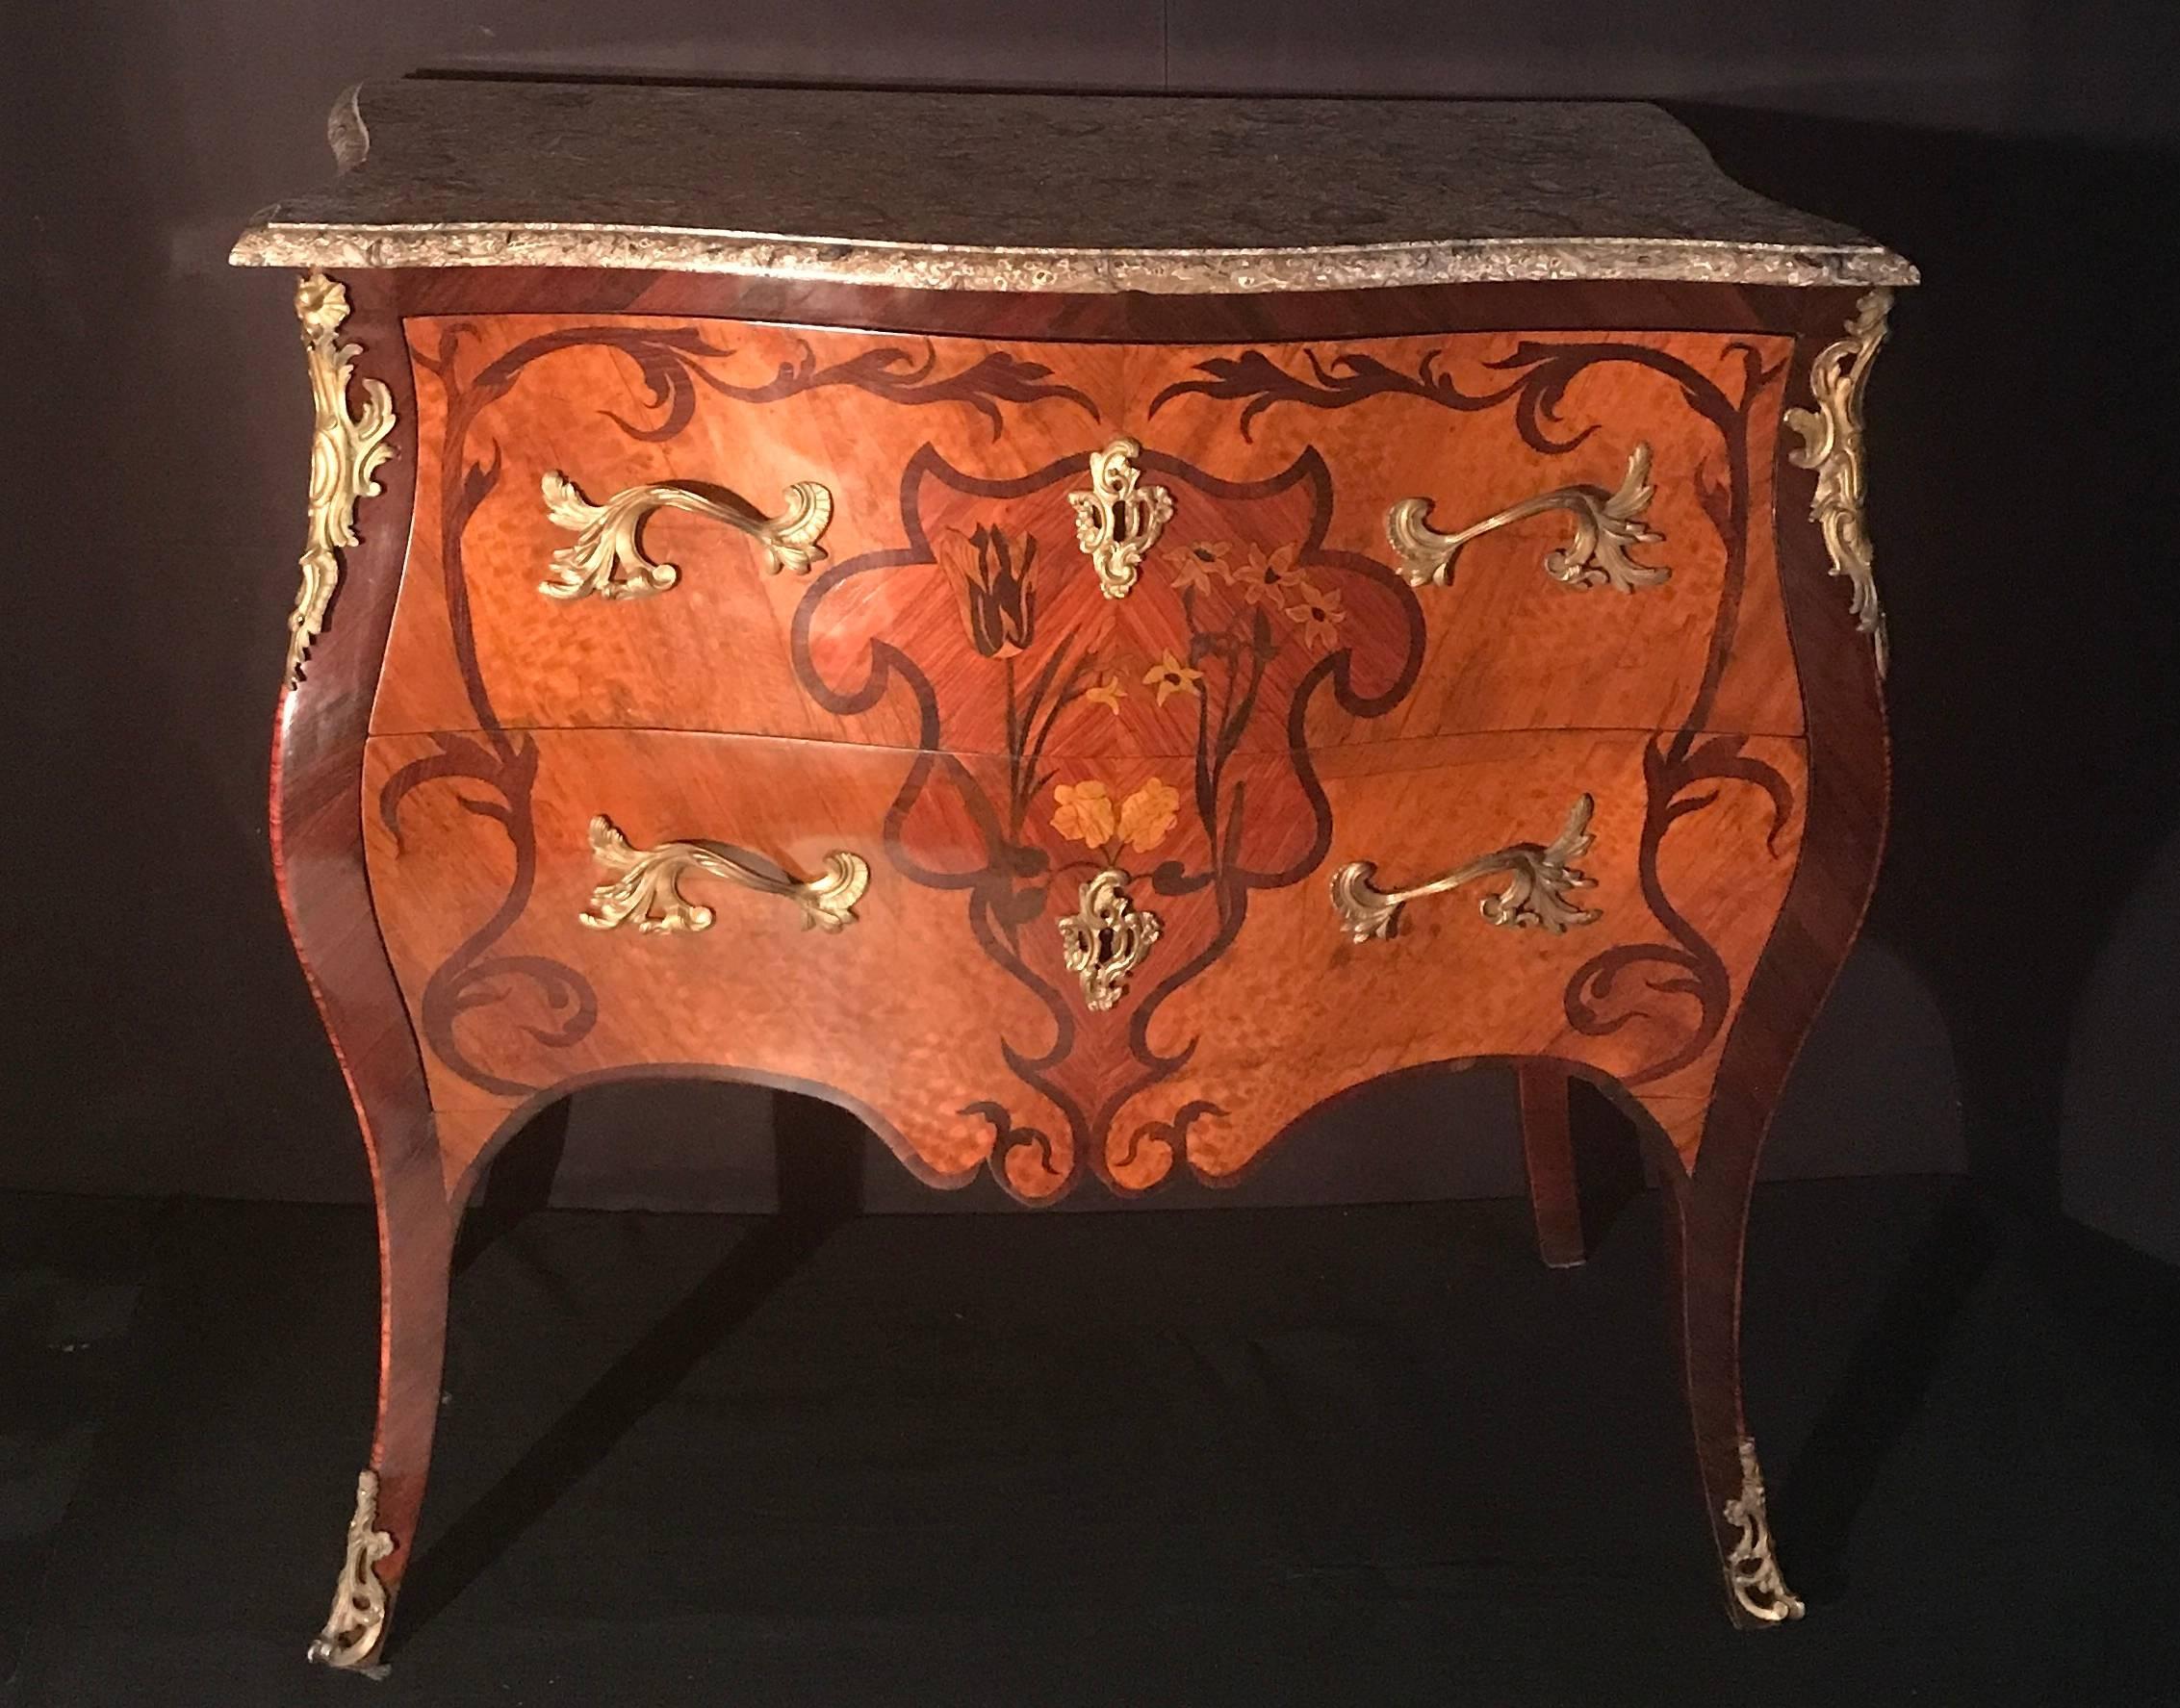 With 'Lumachella ' marble-top above two drawers decorated sans travers and ormolu mounts.
Fine detailed floral inlay with various noble woods. Finely chiseled and gild original bronze fittings.